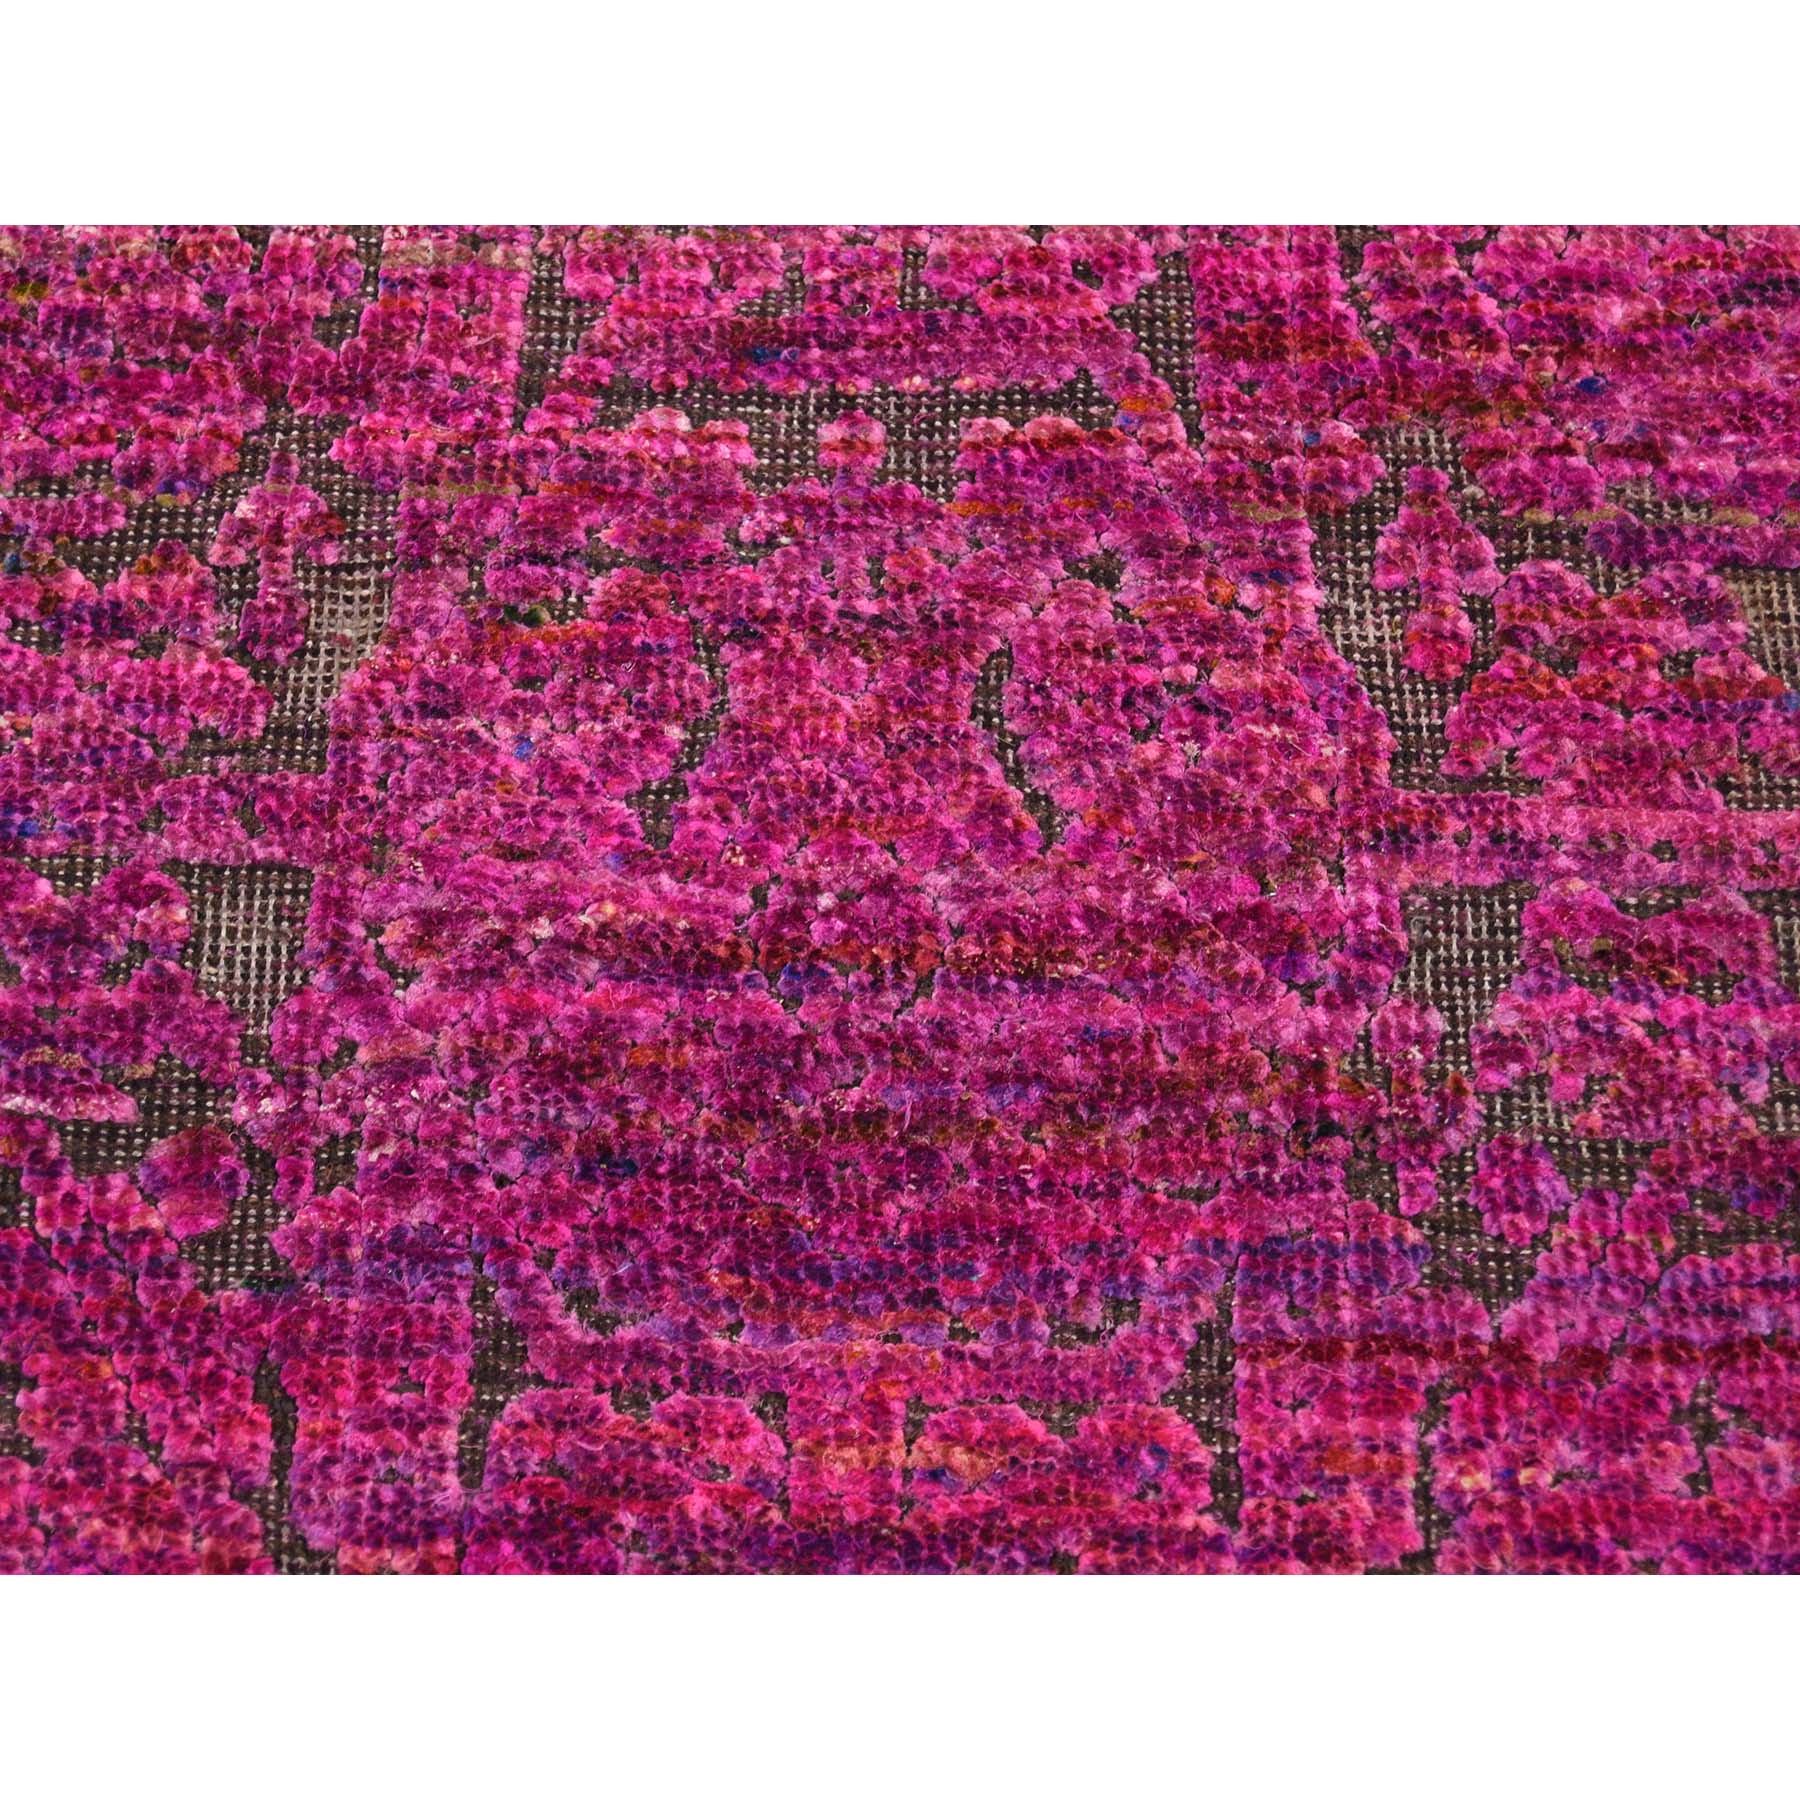 8-10 x11-10  Fuchsia Colors Sari Silk with Textured Wool Hand-Knotted Oriental Rug 